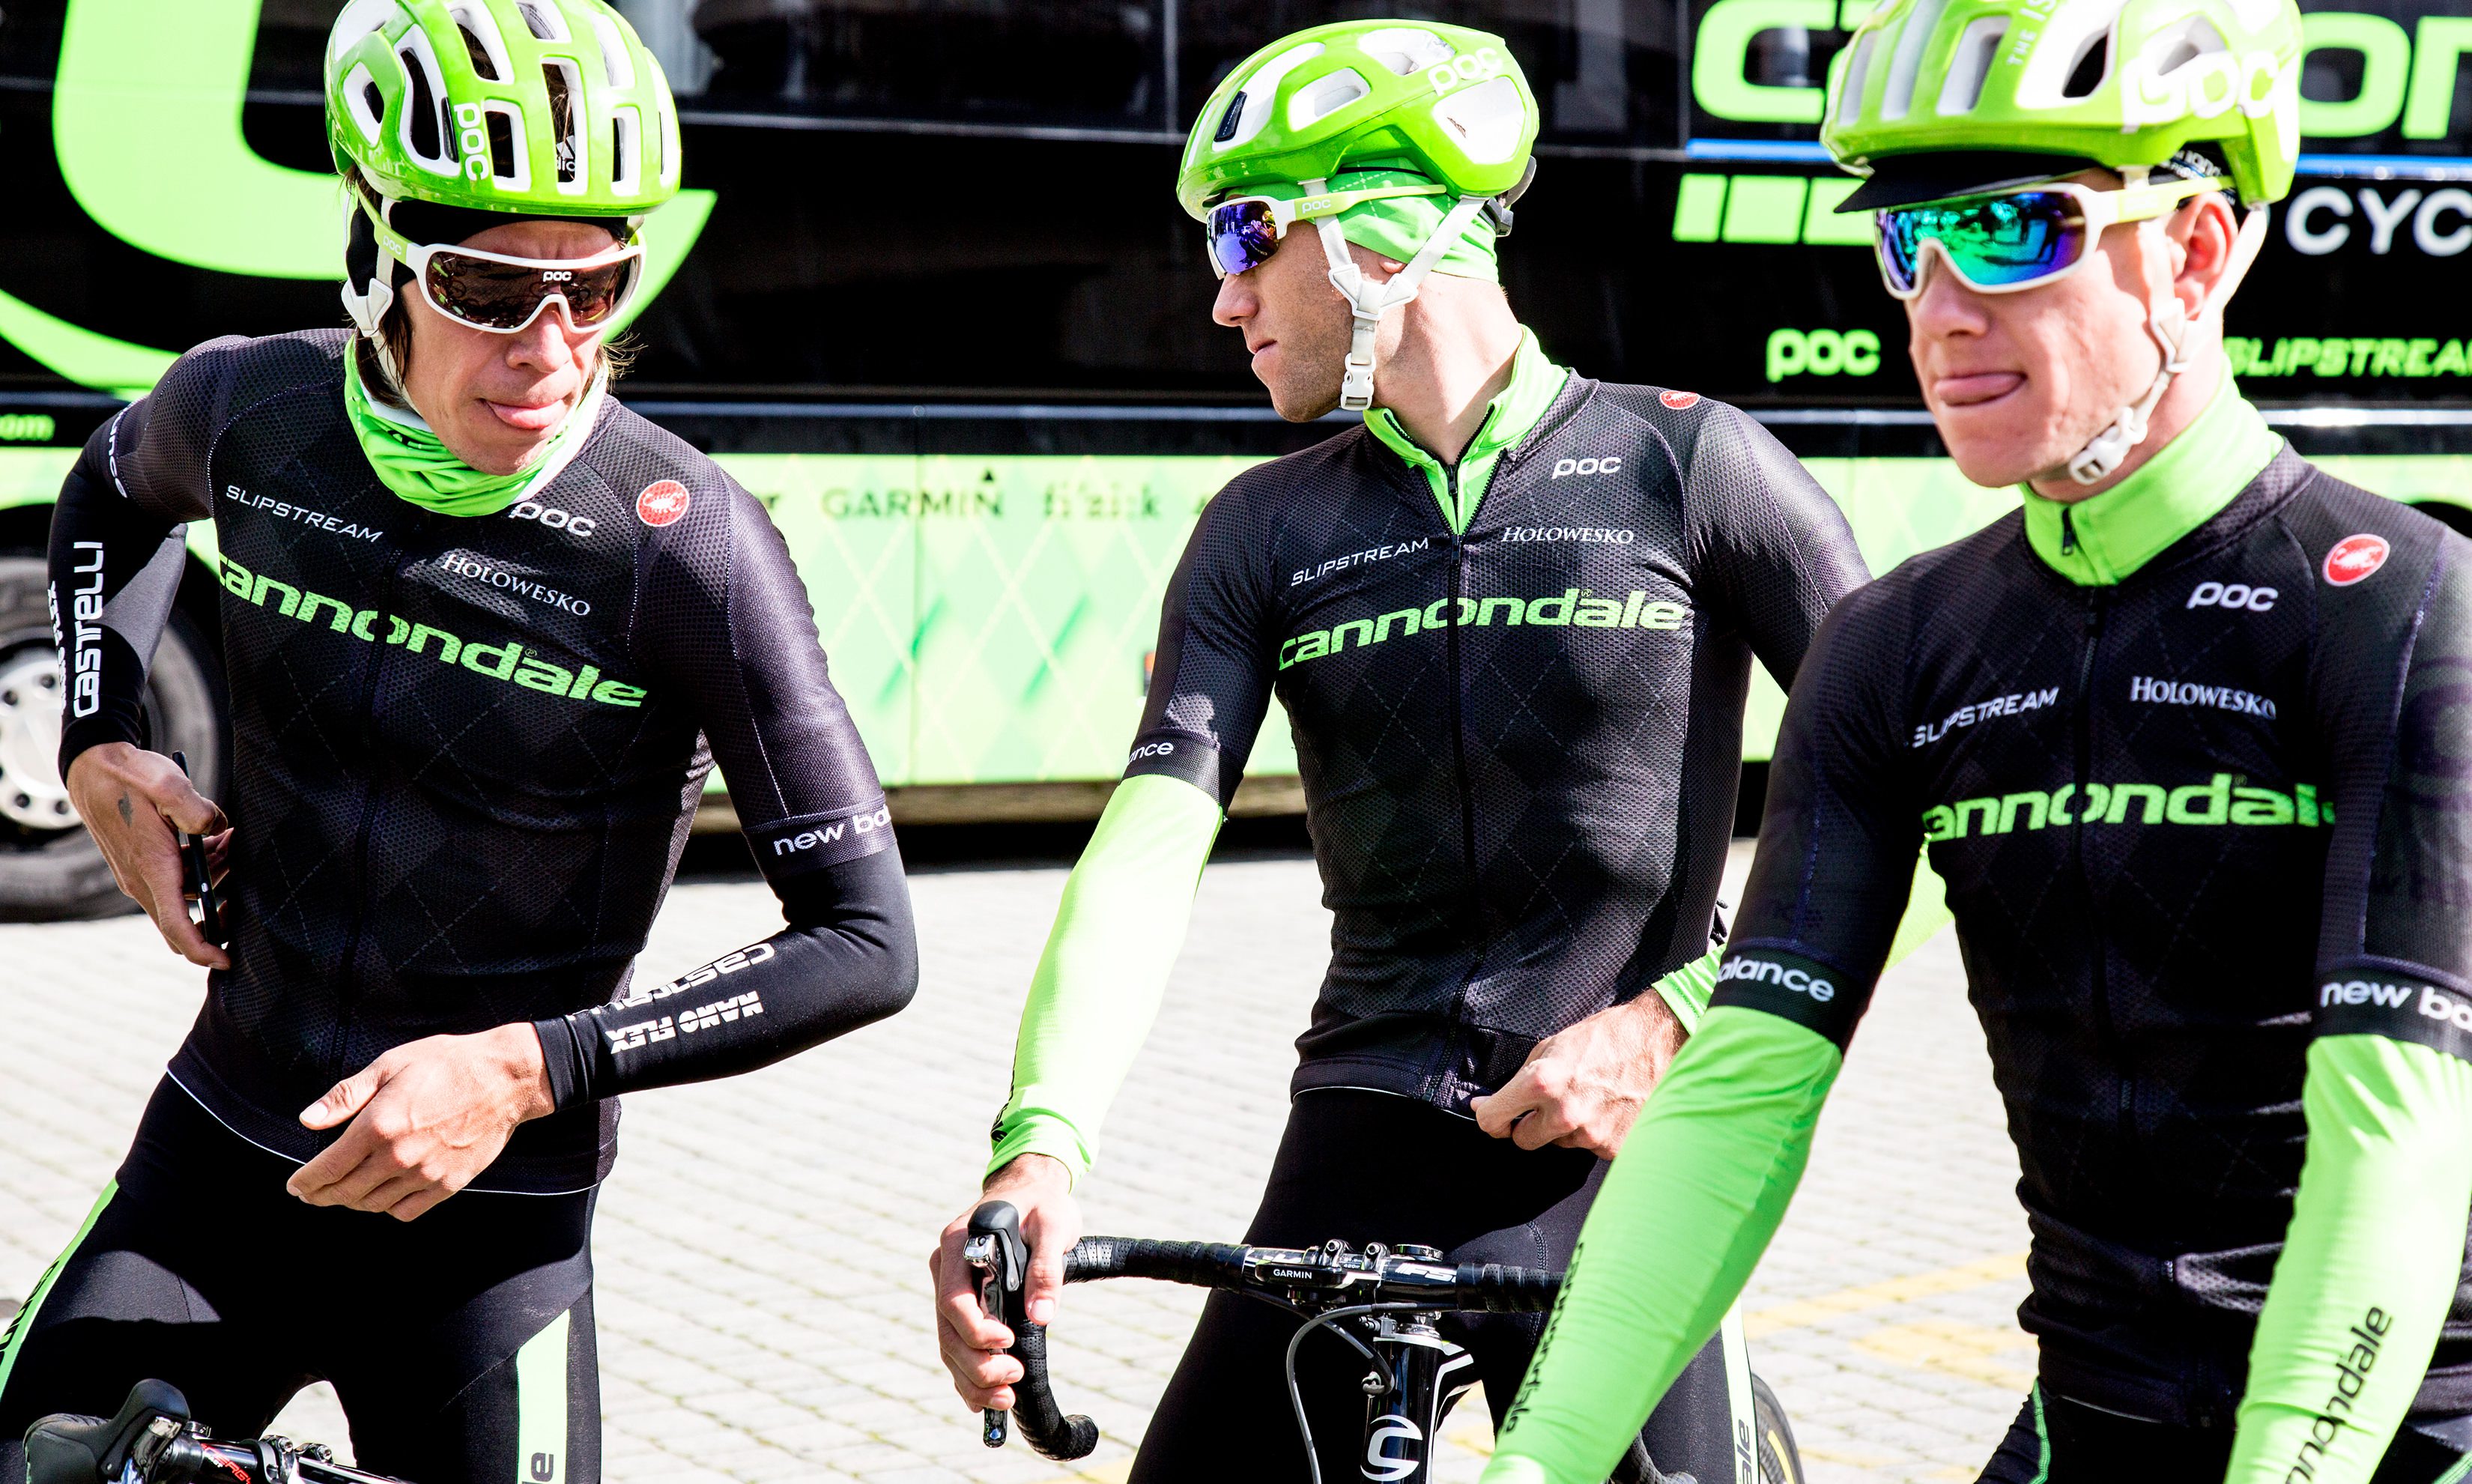 team cannondale jersey